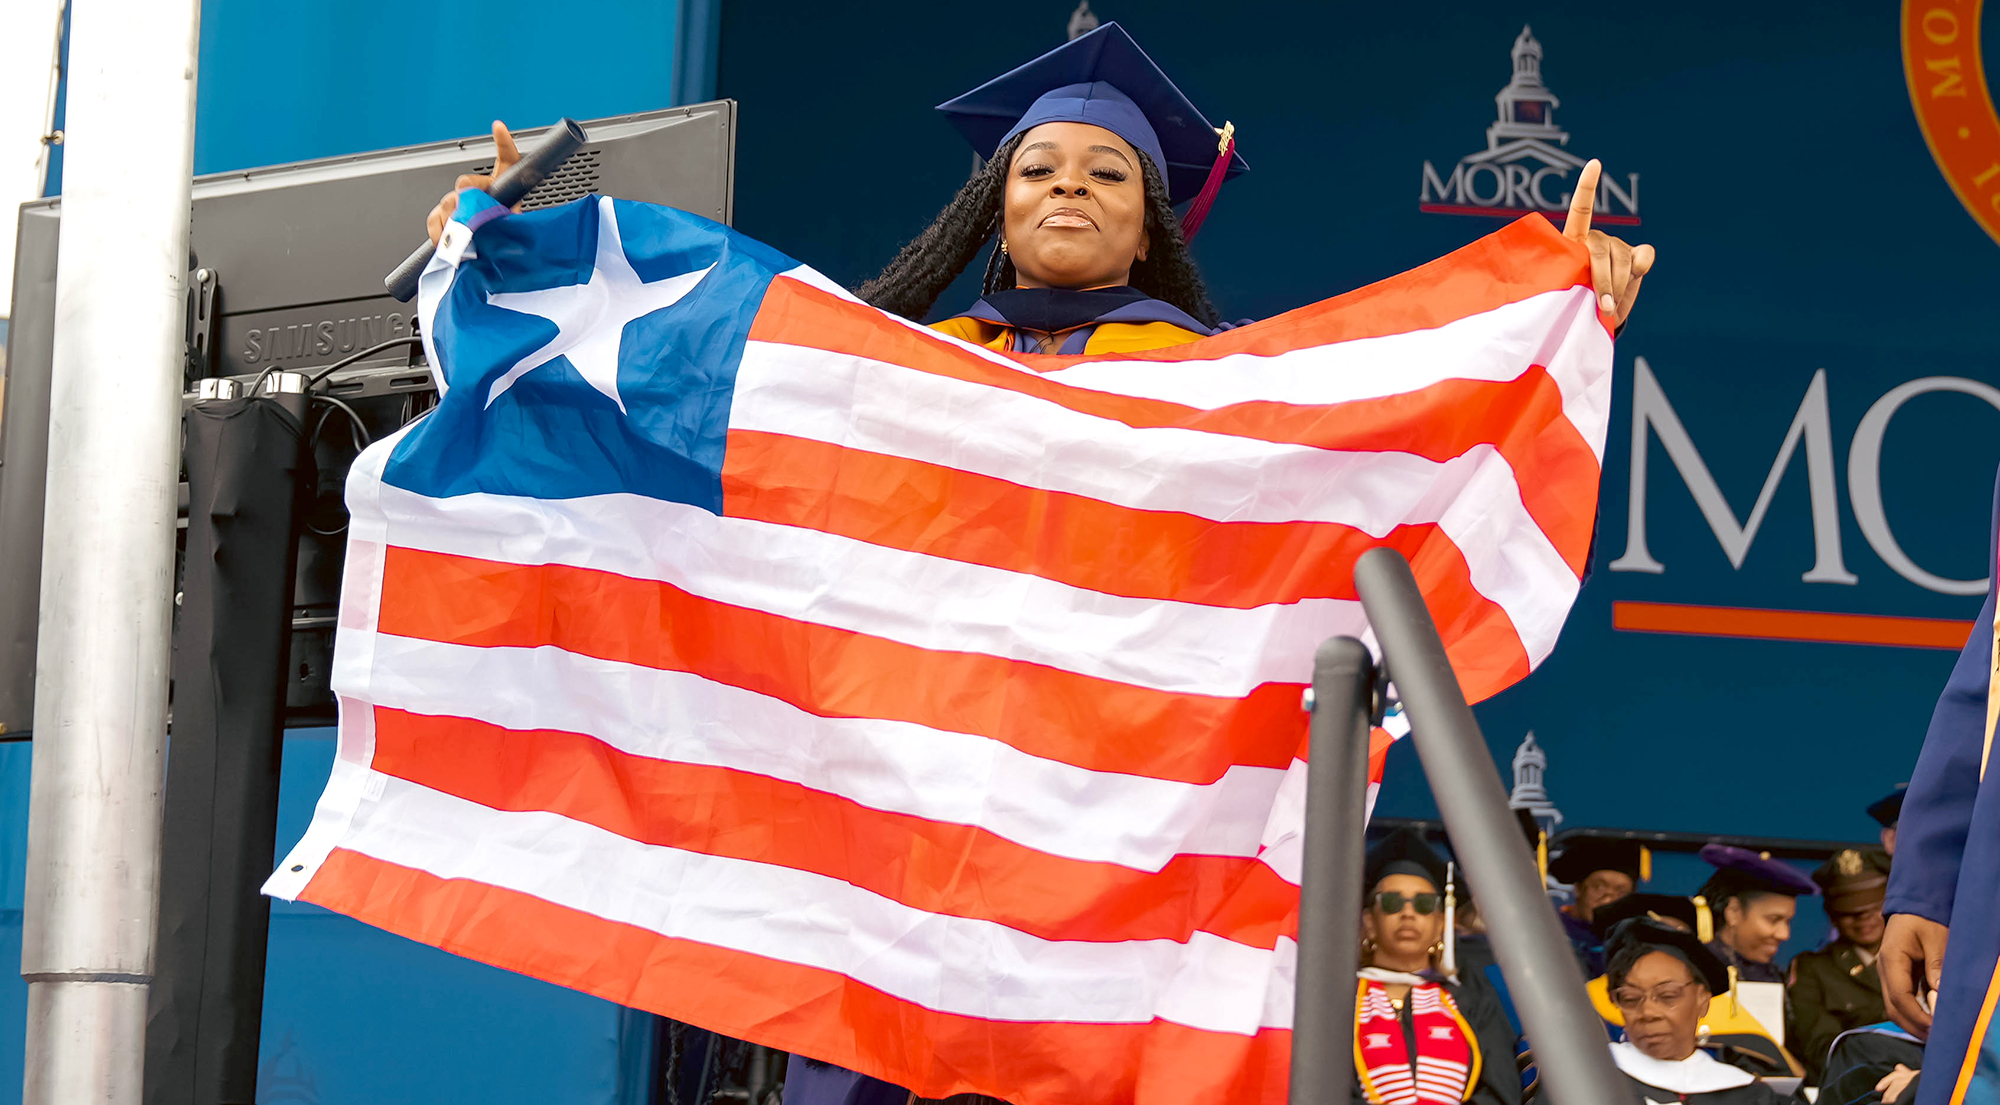 Angel Smith, proudly presenting the Cuban flag, graduates at Morgan’s 2023 Spring Commencement, upon receiving a Bachelor of Science in Multi-Plaftorm Production from the School of Global Journalism and Communication.